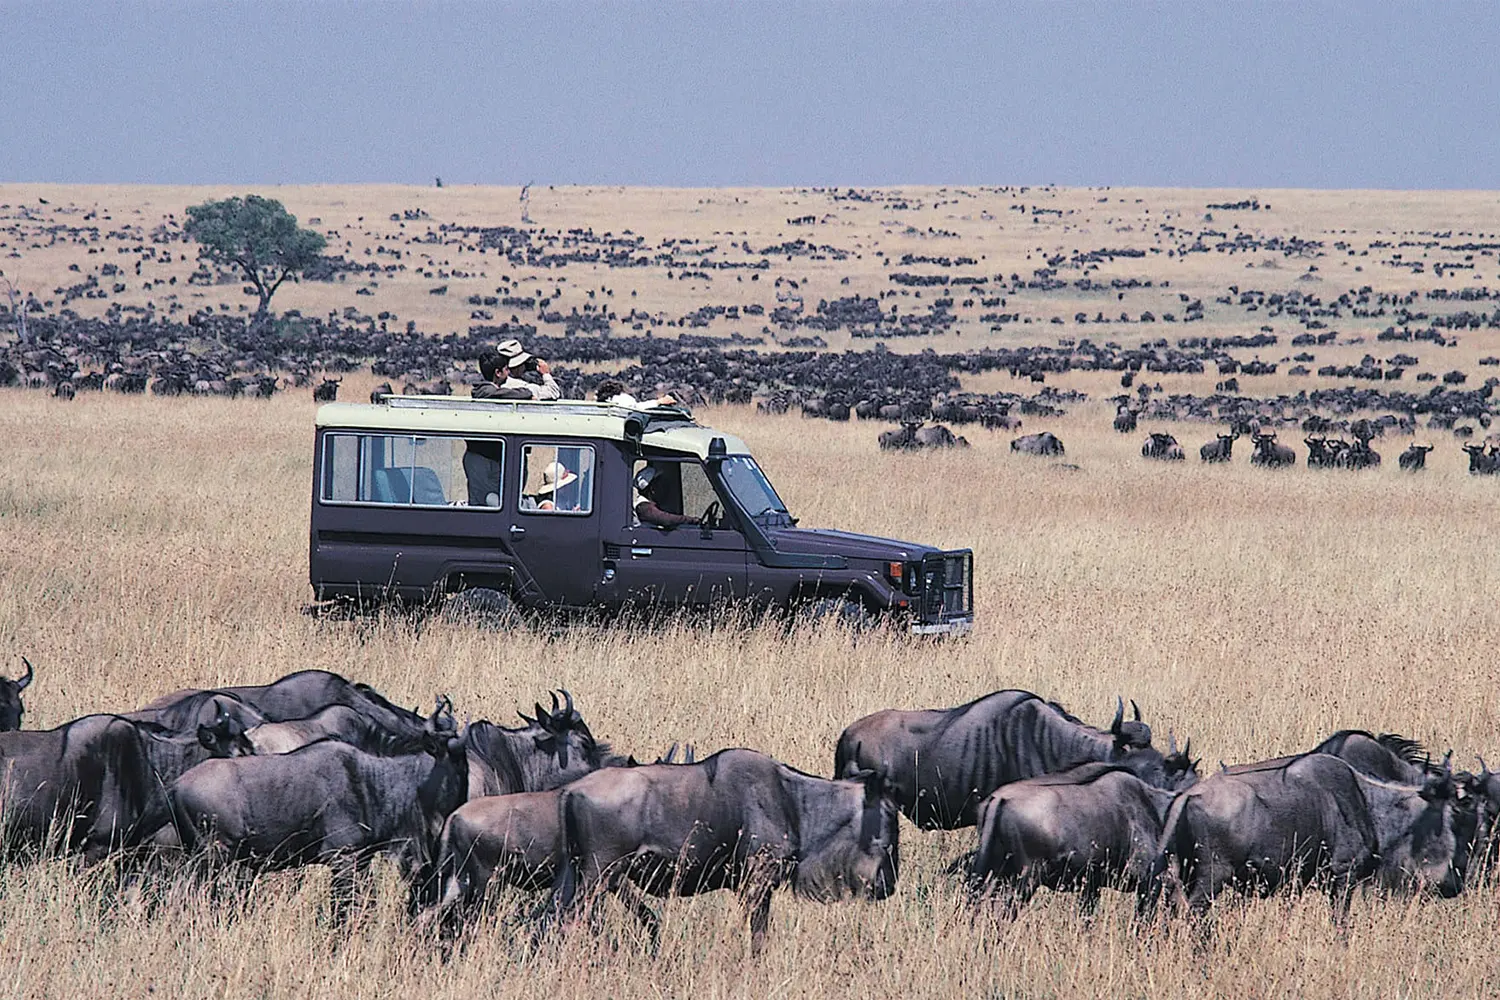 Fees for Tanzania national parks